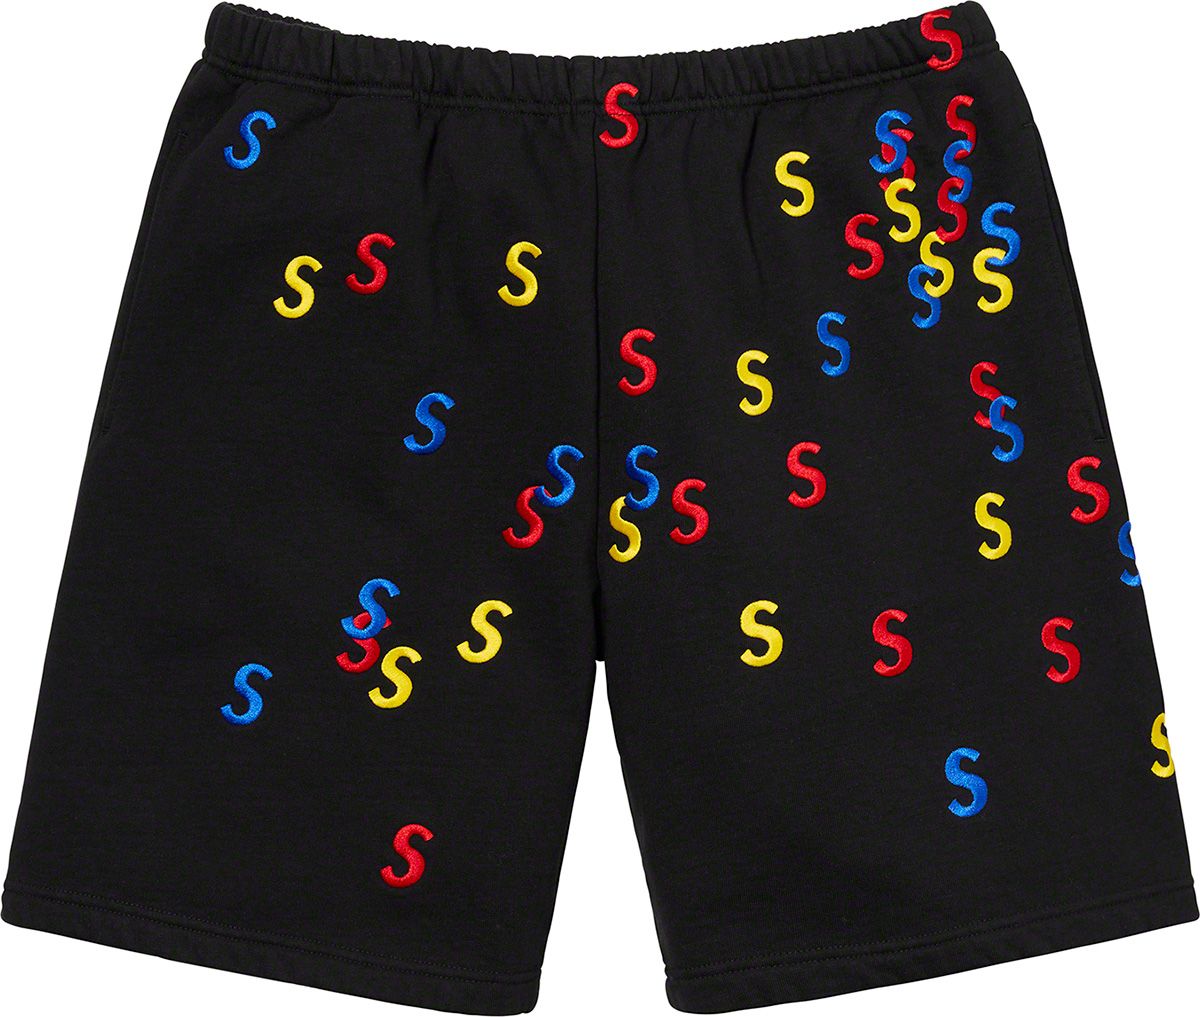 Dragon Water Short - Spring/Summer 2021 Preview – Supreme